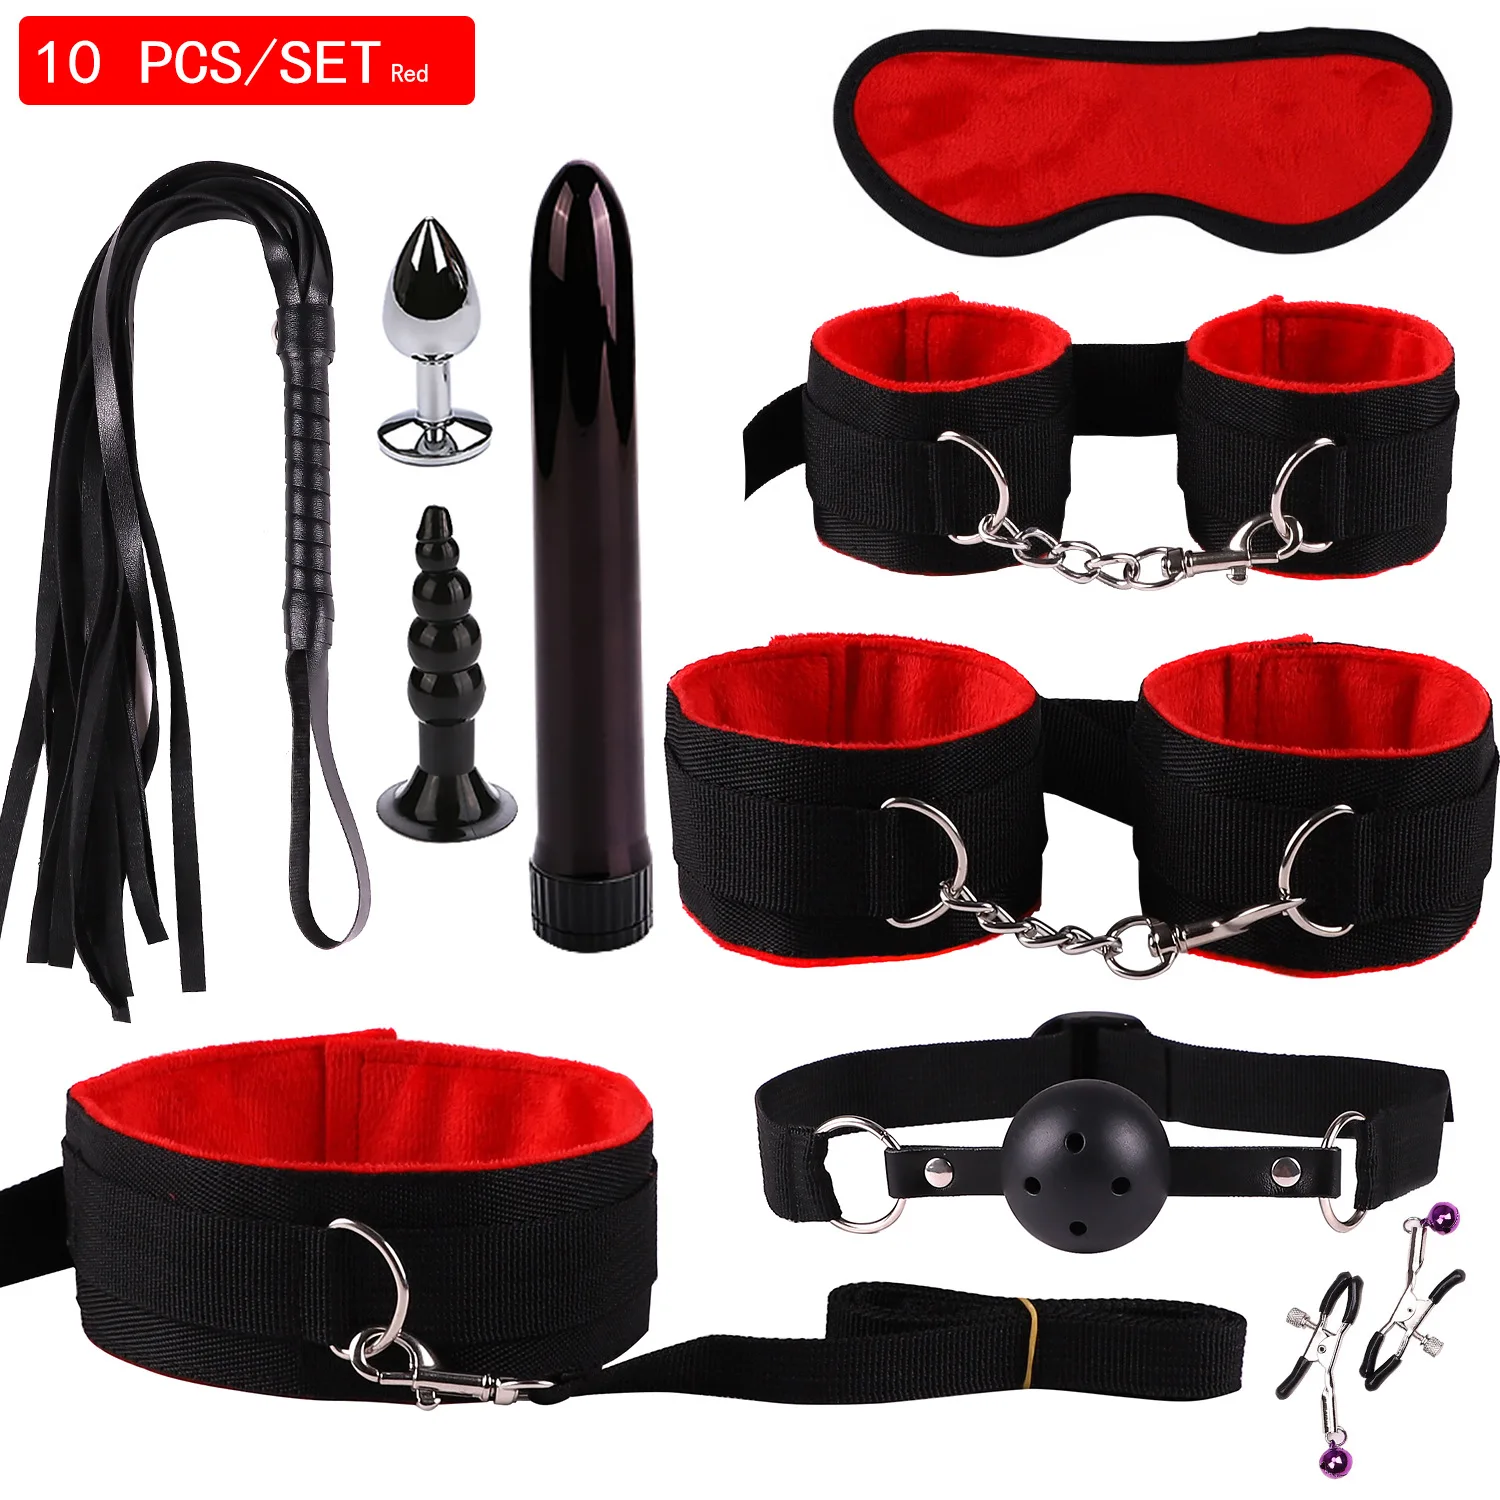 Exotic Sex Products For Adults Games Leather Bondage BDSM Kits Handcuffs Sex Toys Whip Gag Tail